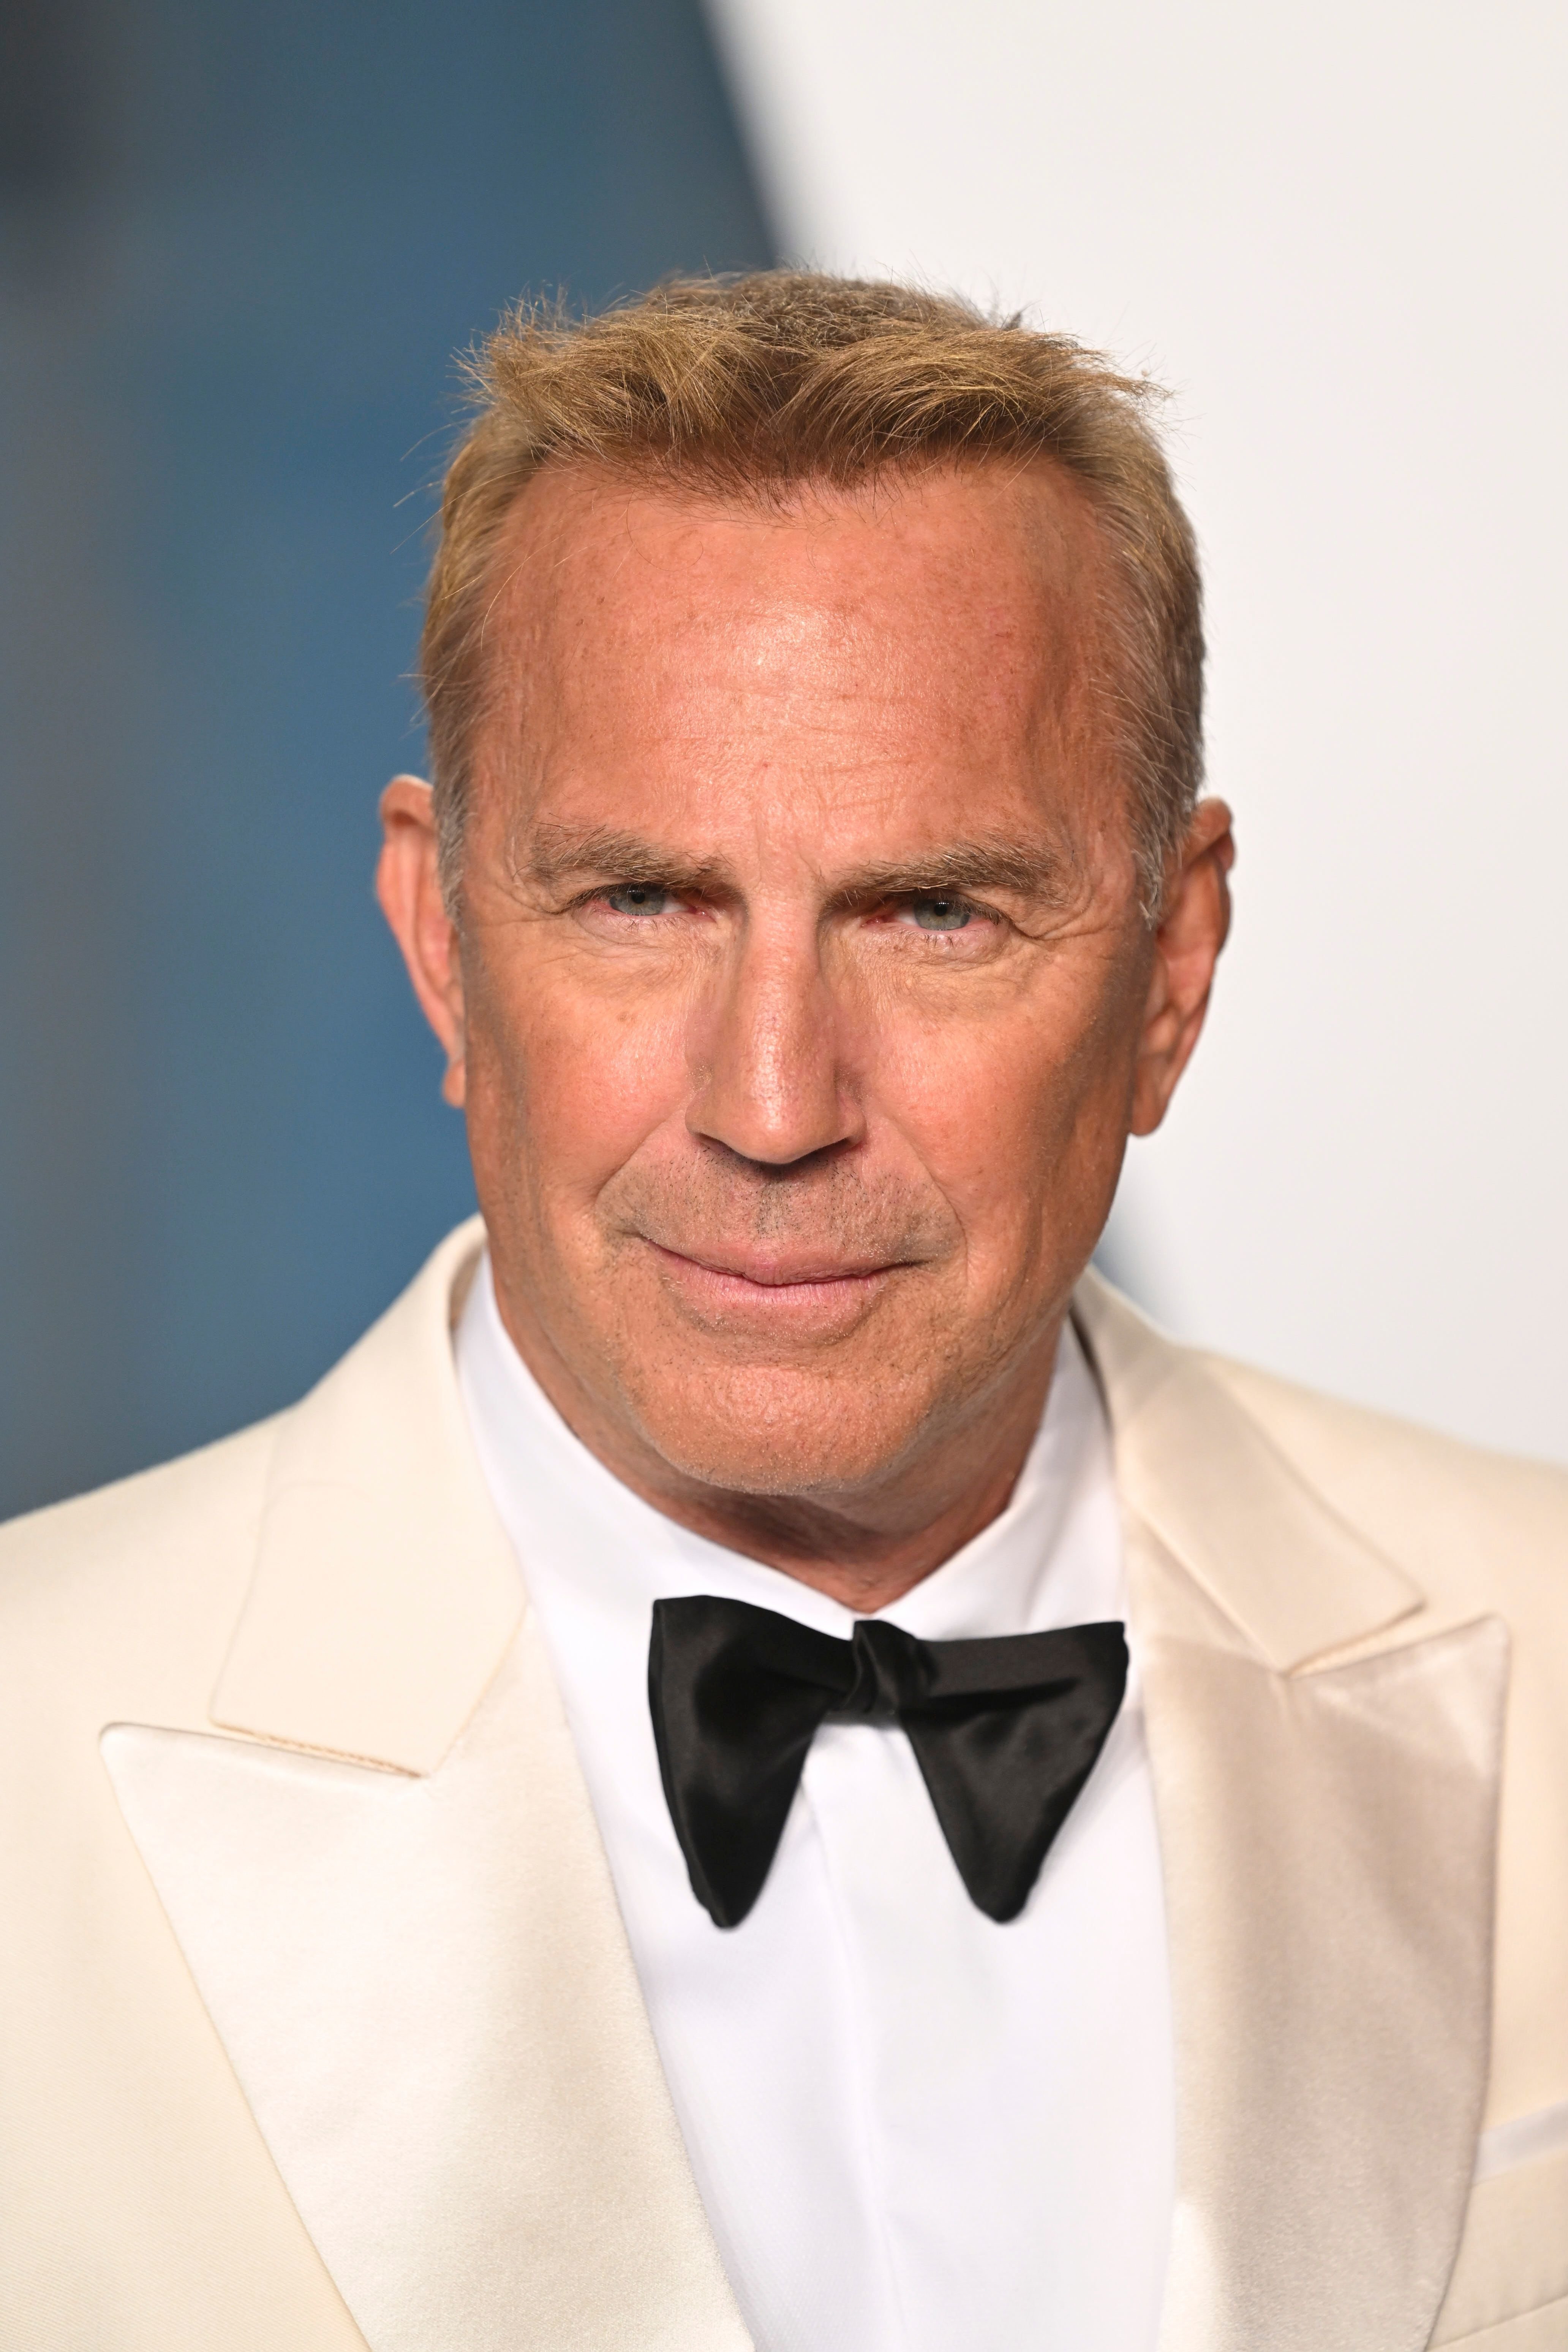 Kevin Costner during the 2022 Vanity Fair Oscar Party hosted by Radhika Jones at Wallis Annenberg Center for the Performing Arts on March 27, 2022, in Beverly Hills, California. | Source: Getty Images